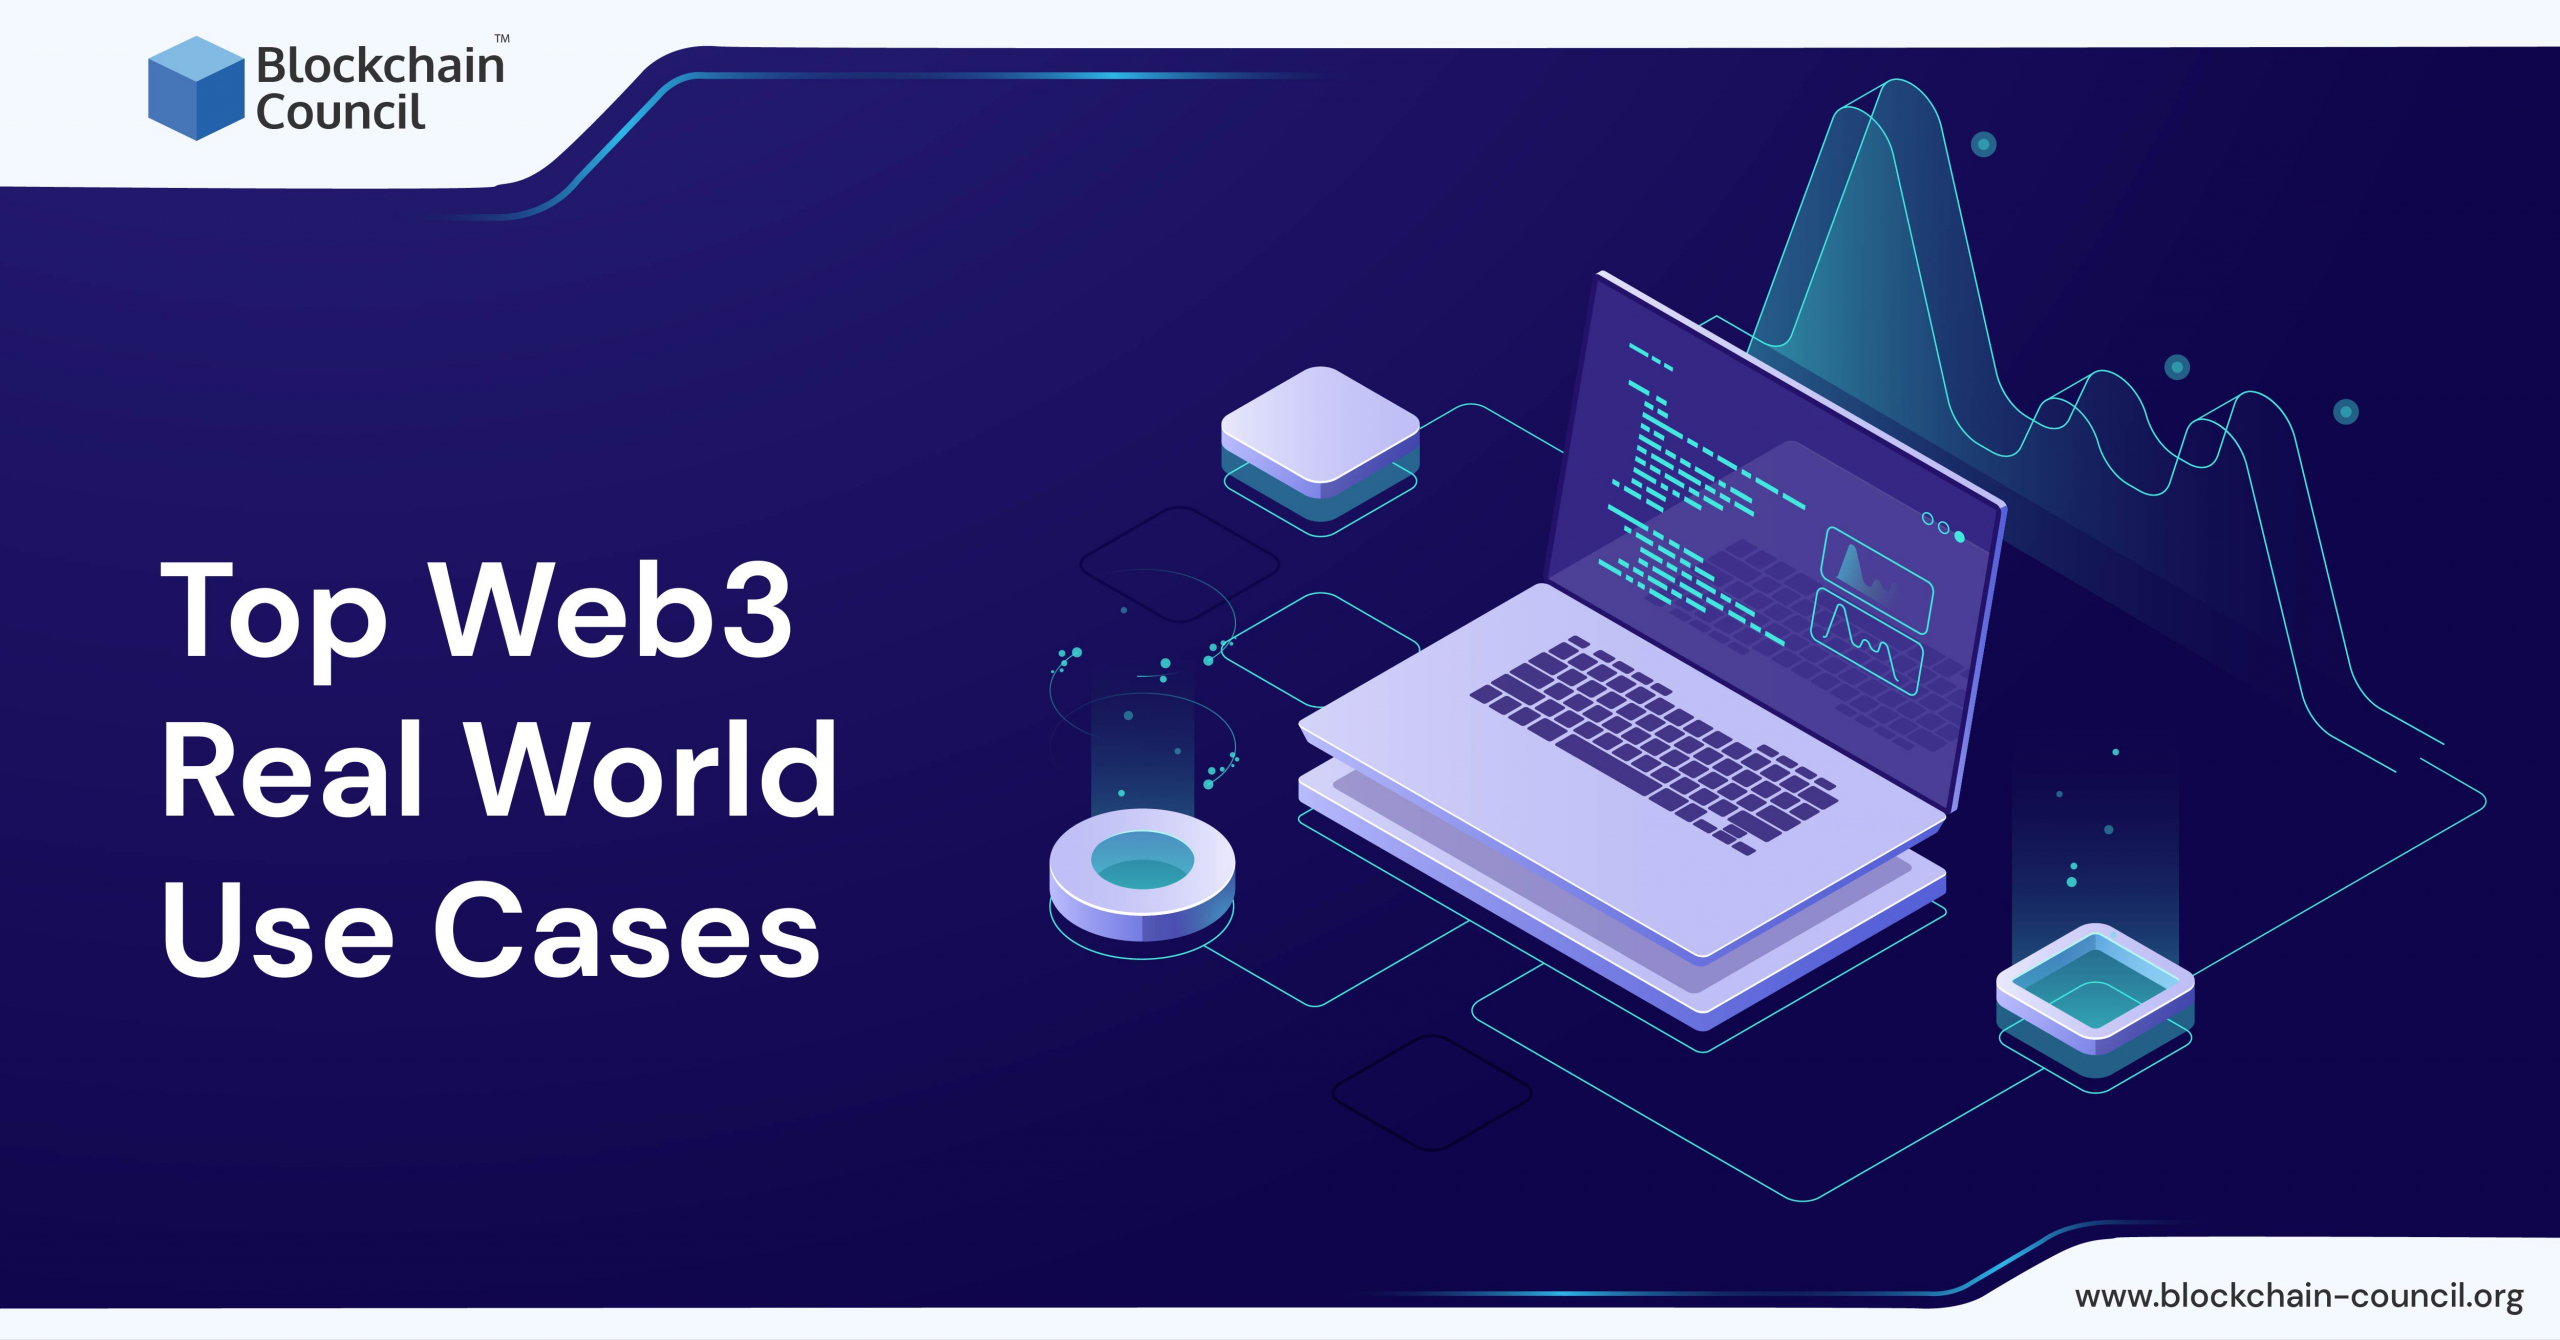 Top Web3 Real World Use Cases